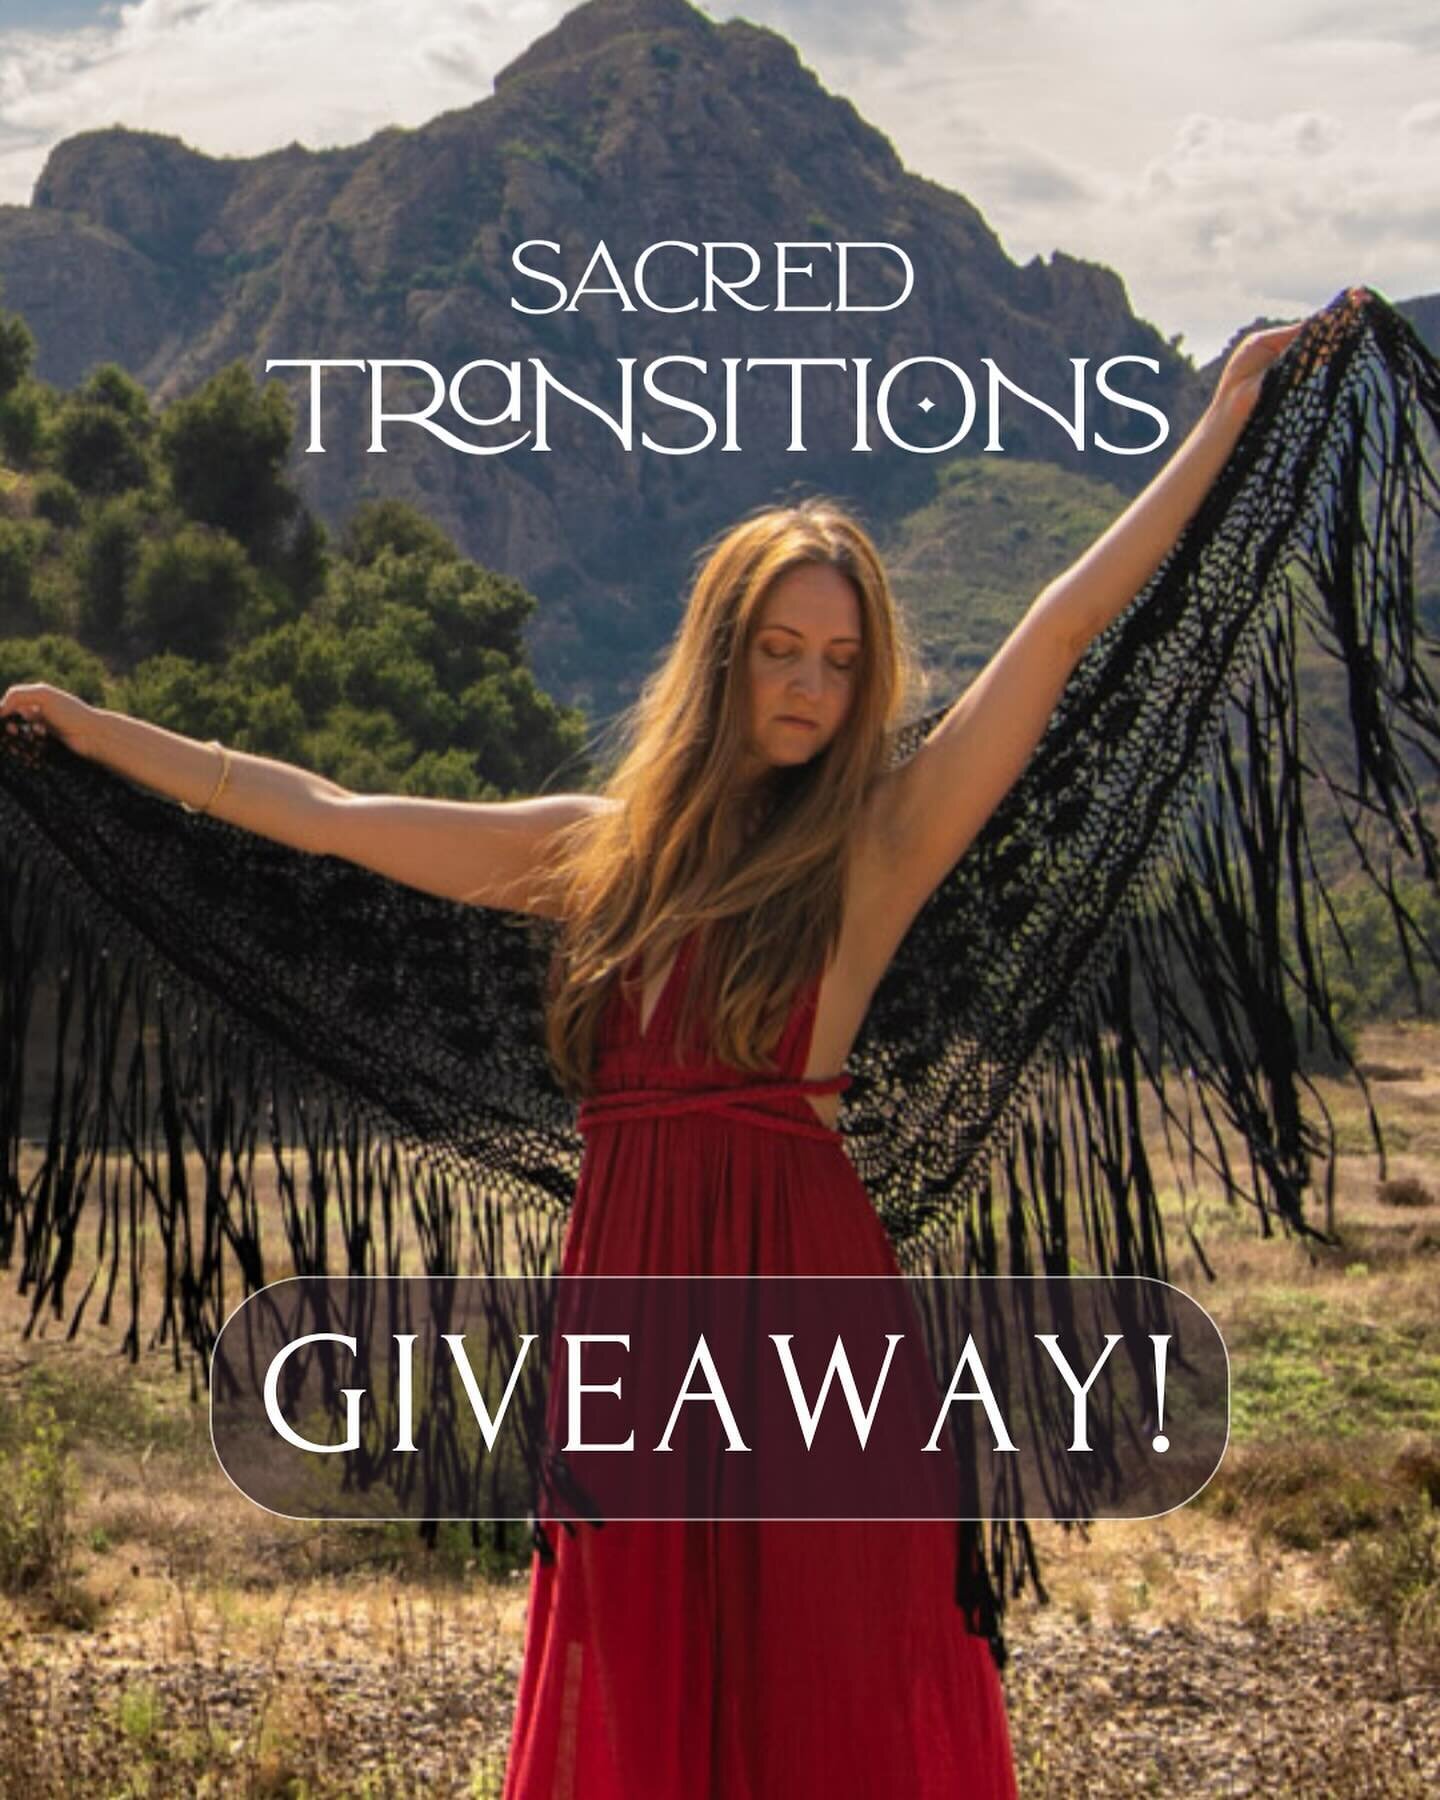 Join the GIVEAWAY! 🔥✨ Read the details below 👇🏼

Sacred Transitions is a 3-month journey to be held through your time of transition as you rebirth into your new chapter.

You will be guided on deep healing journeys LIVE with your sisters as you re